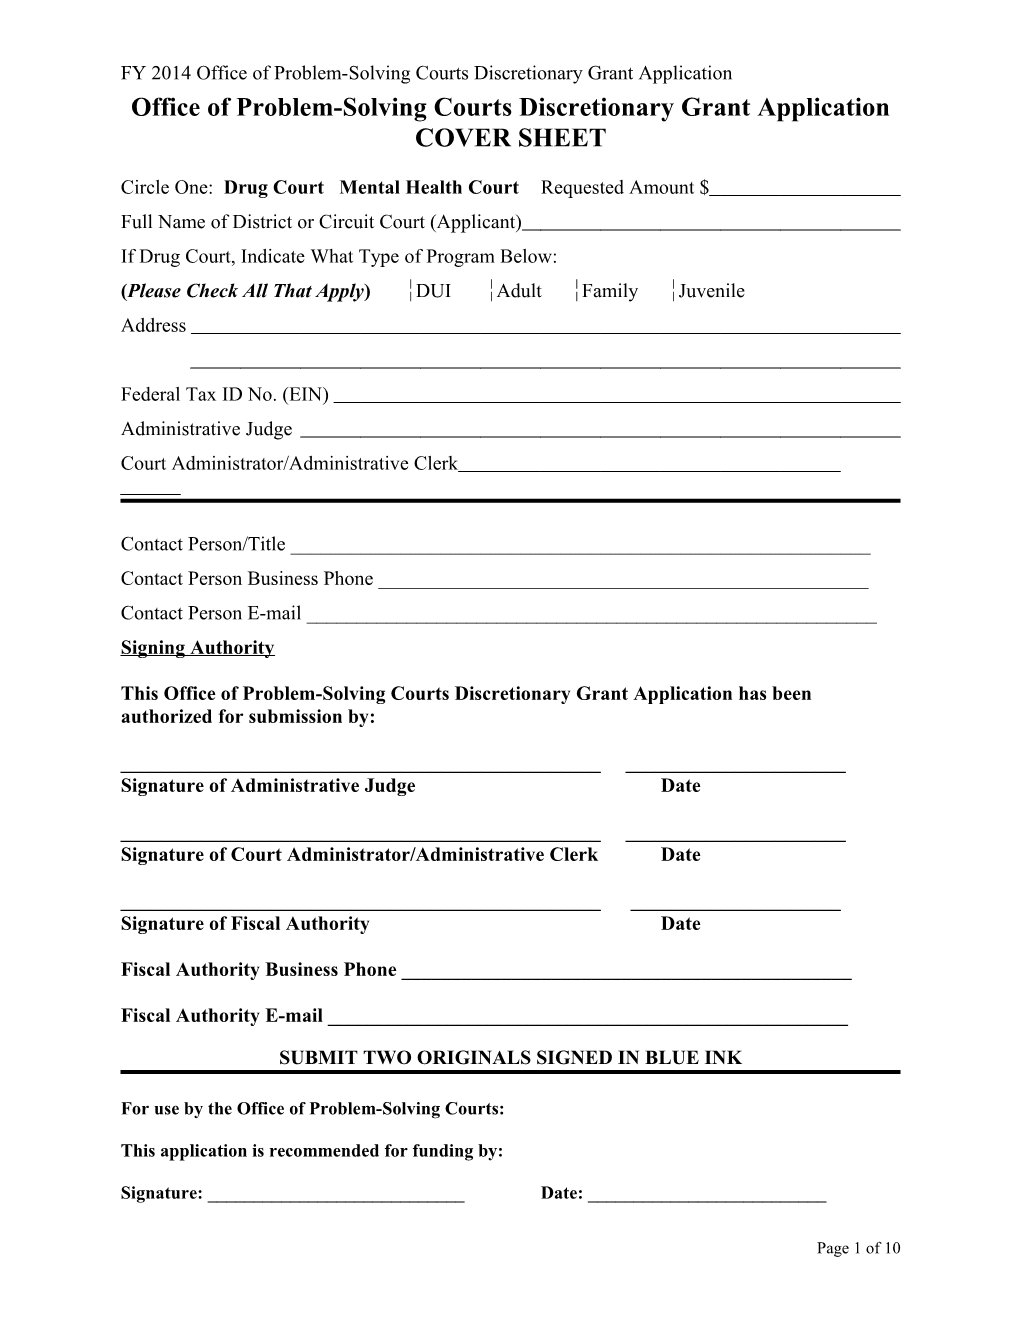 Mental Health Court Grant Application Cover Sheet